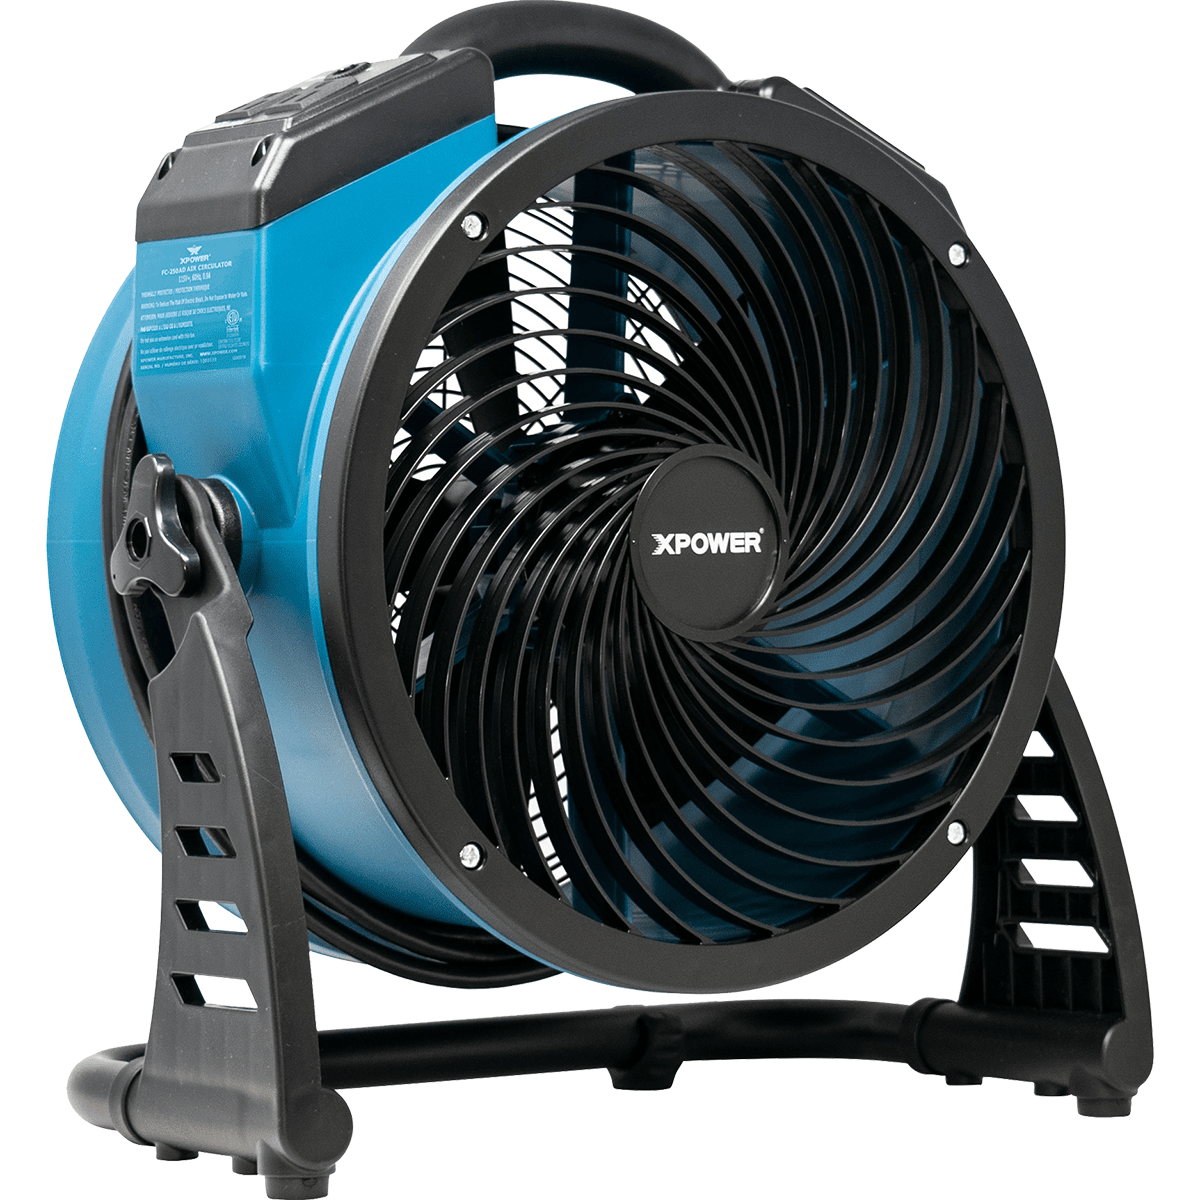 XPOWER FC-250AD Pro 13-in. Brushless DC Motor Air Circulator Utility Fan W/ Power Outlets